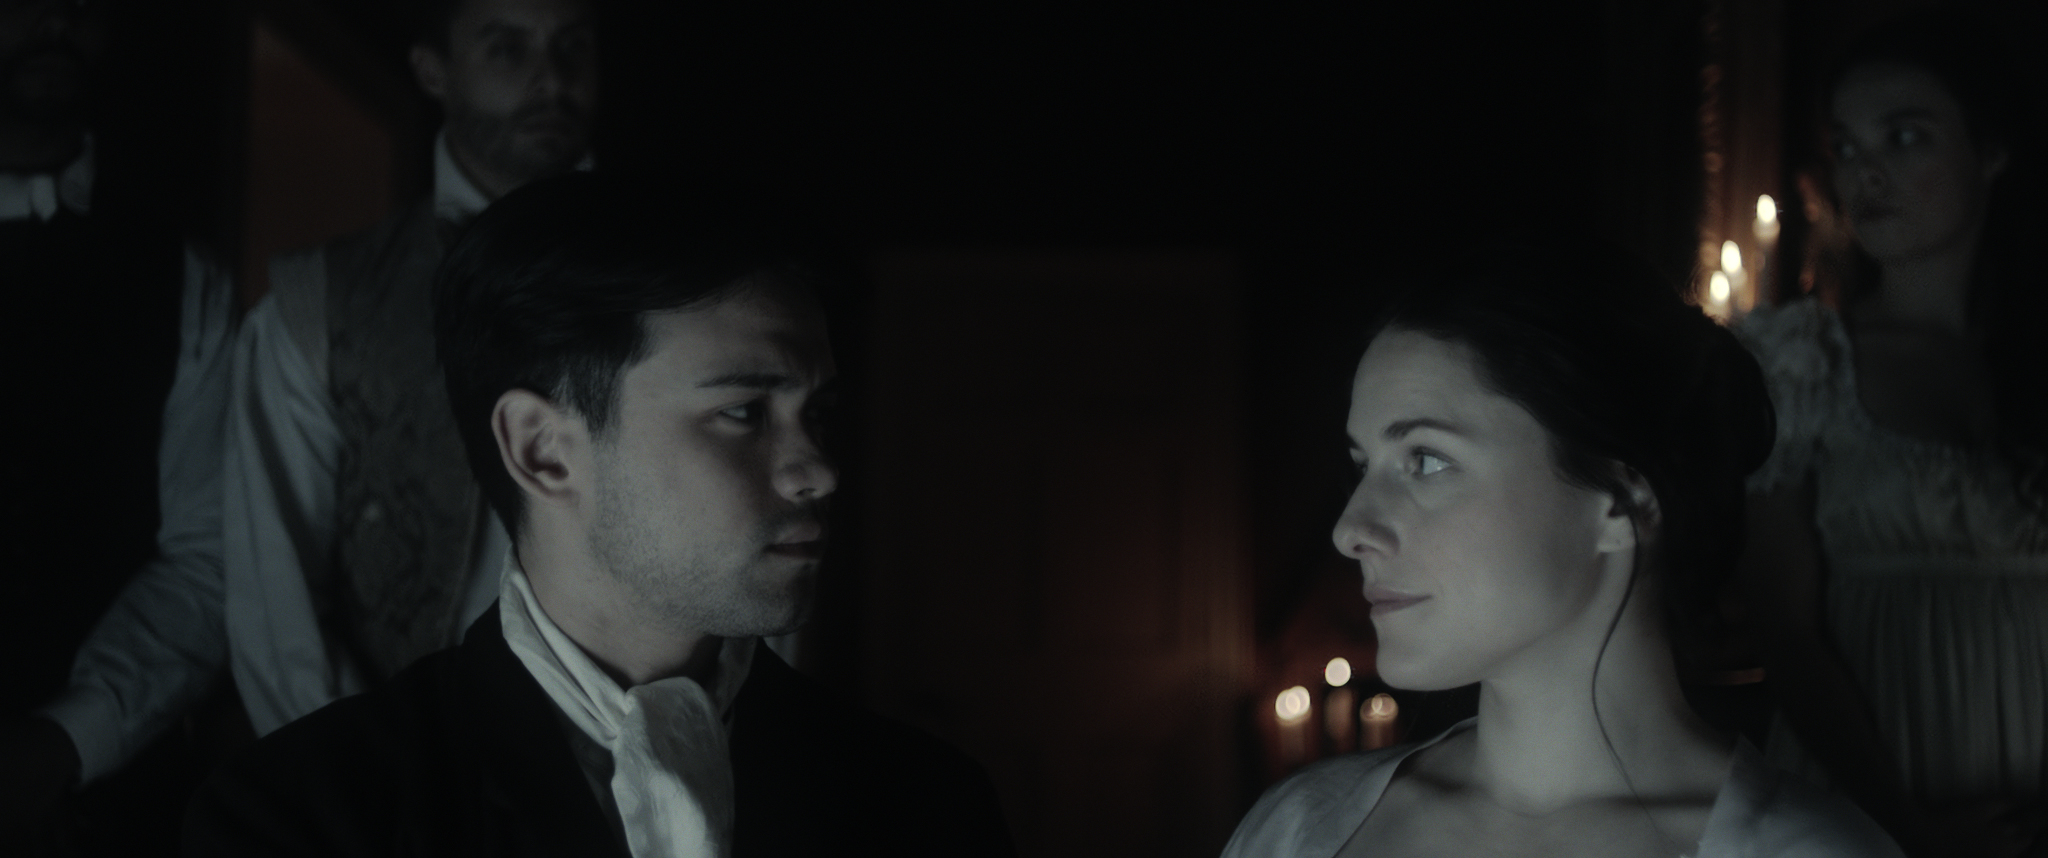 Stars of ‘A Nightmare Wakes’ Alix Wilton Regan And Giullian Yao Gioiello Talk About The Shelley’s Relationship [Exclusive Interview]